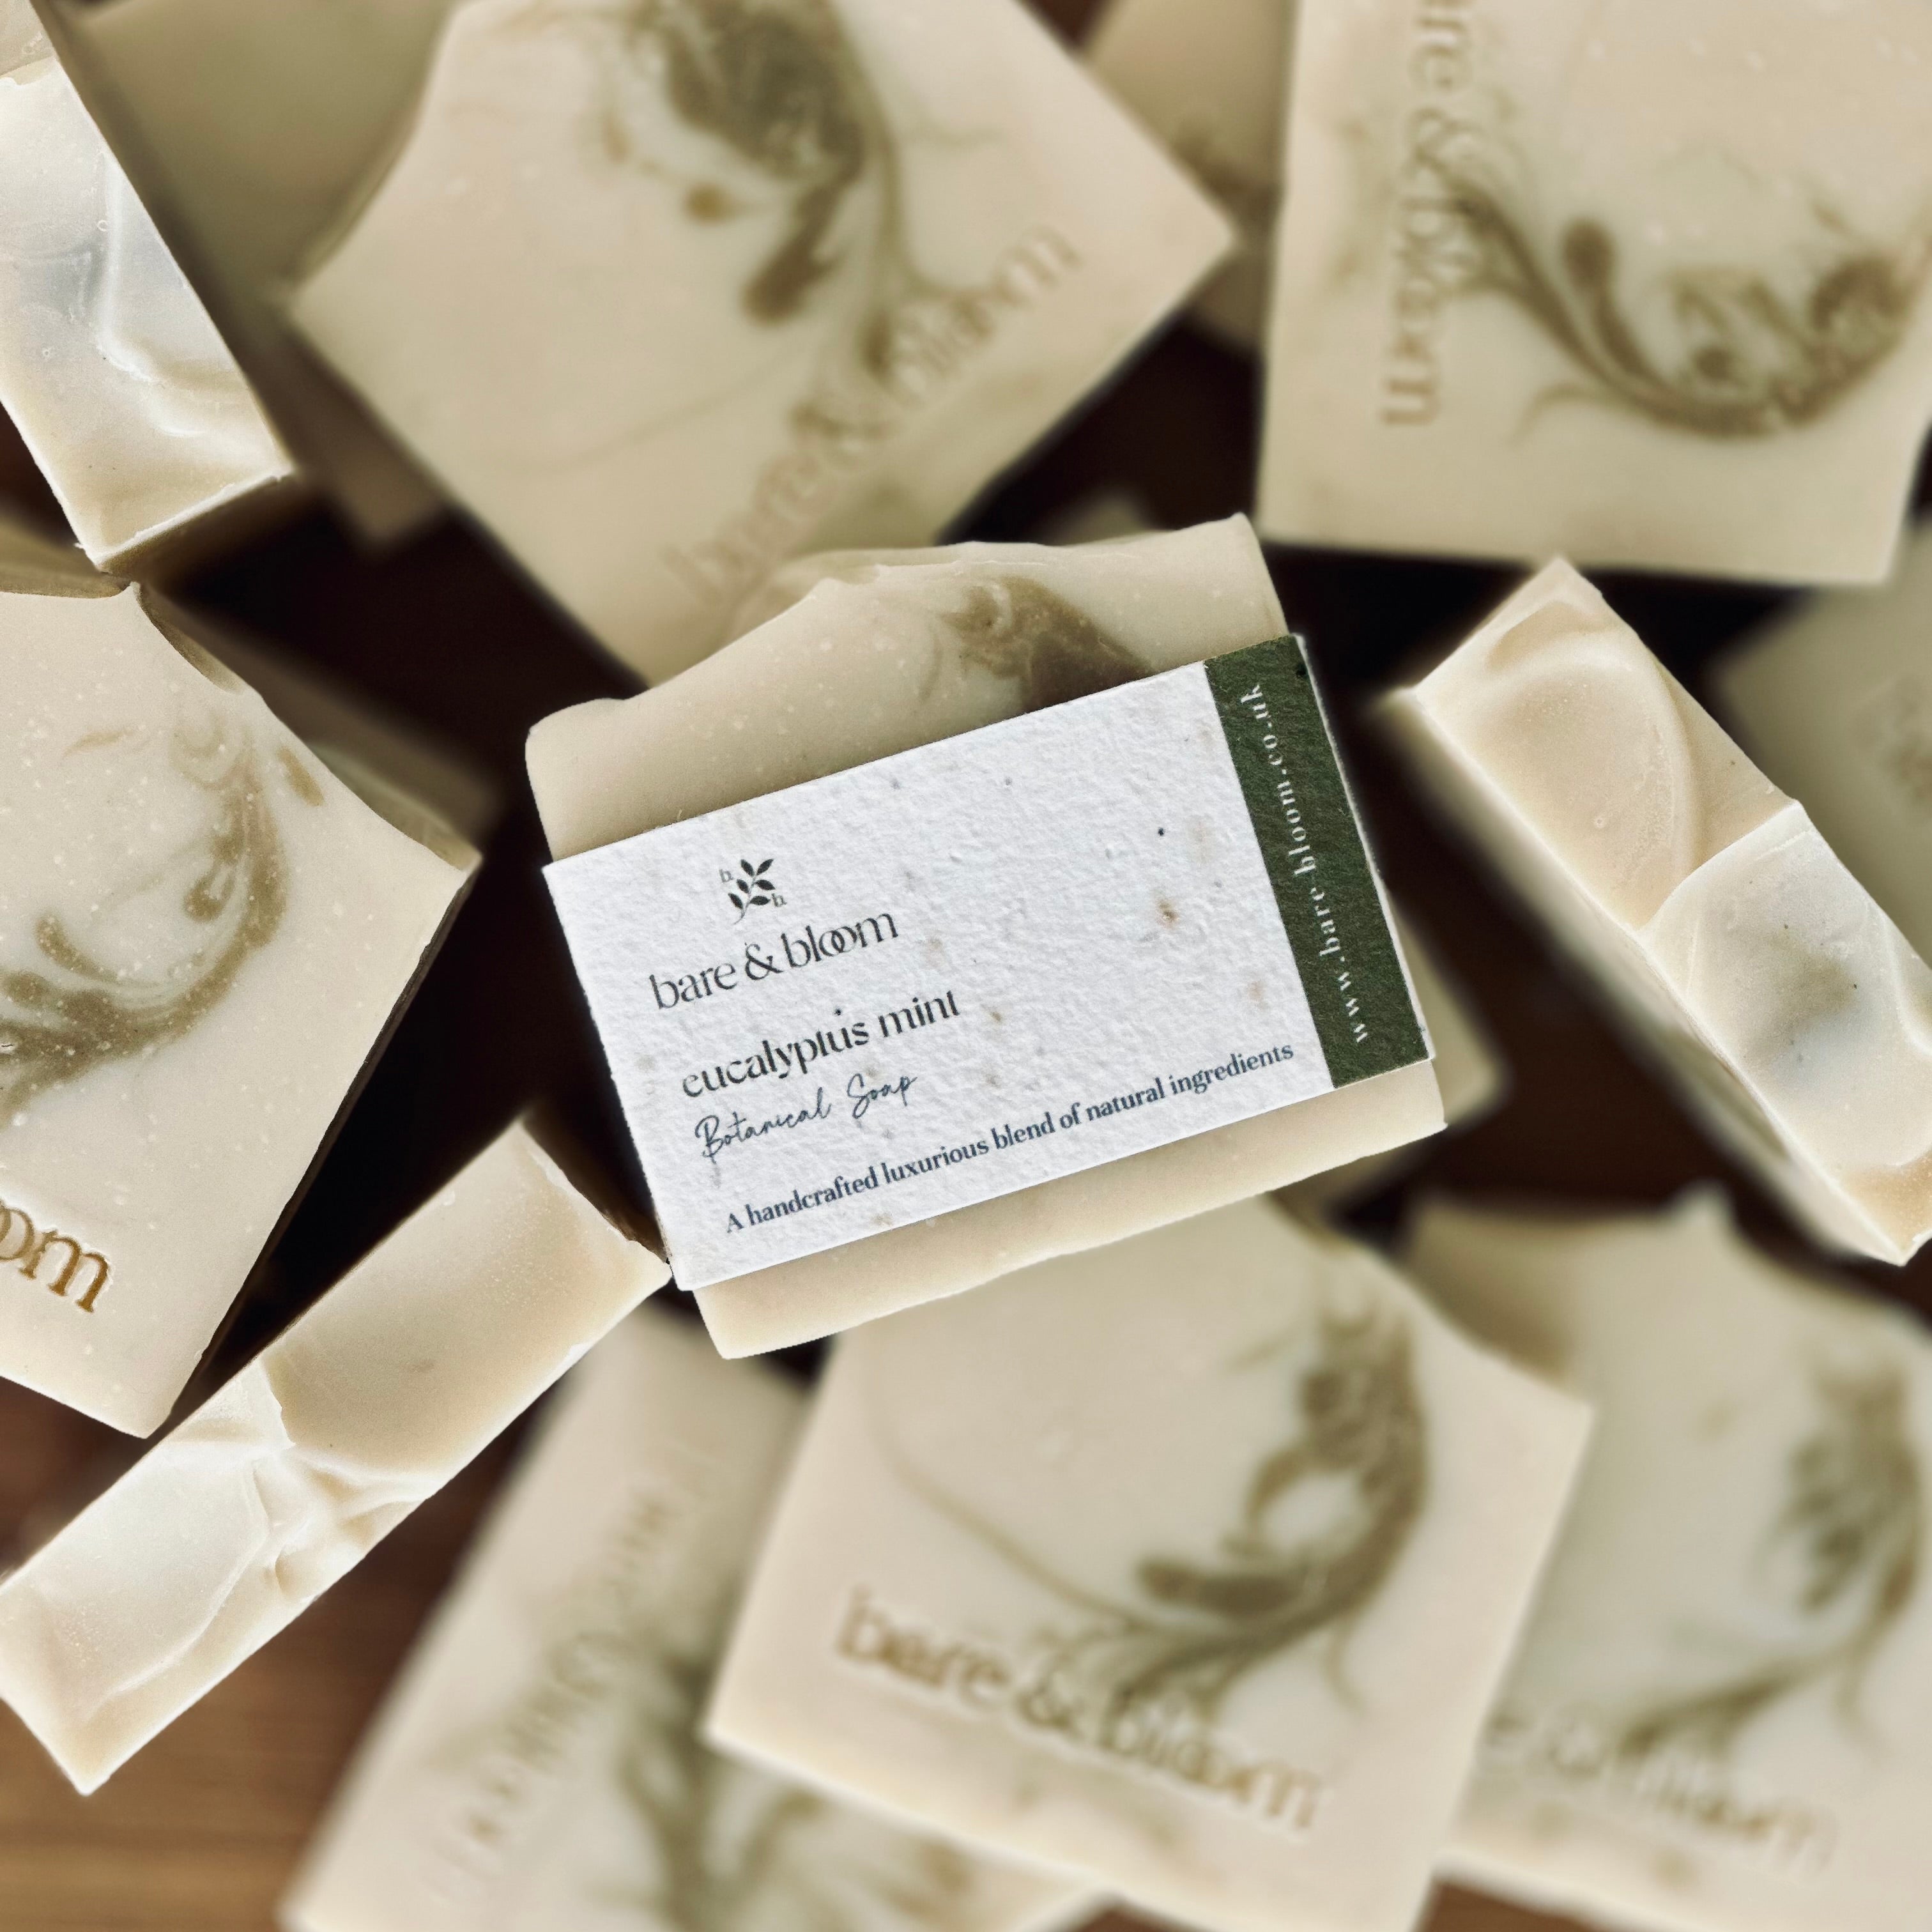 eucalyptus mint natural artisan soap with seeded label